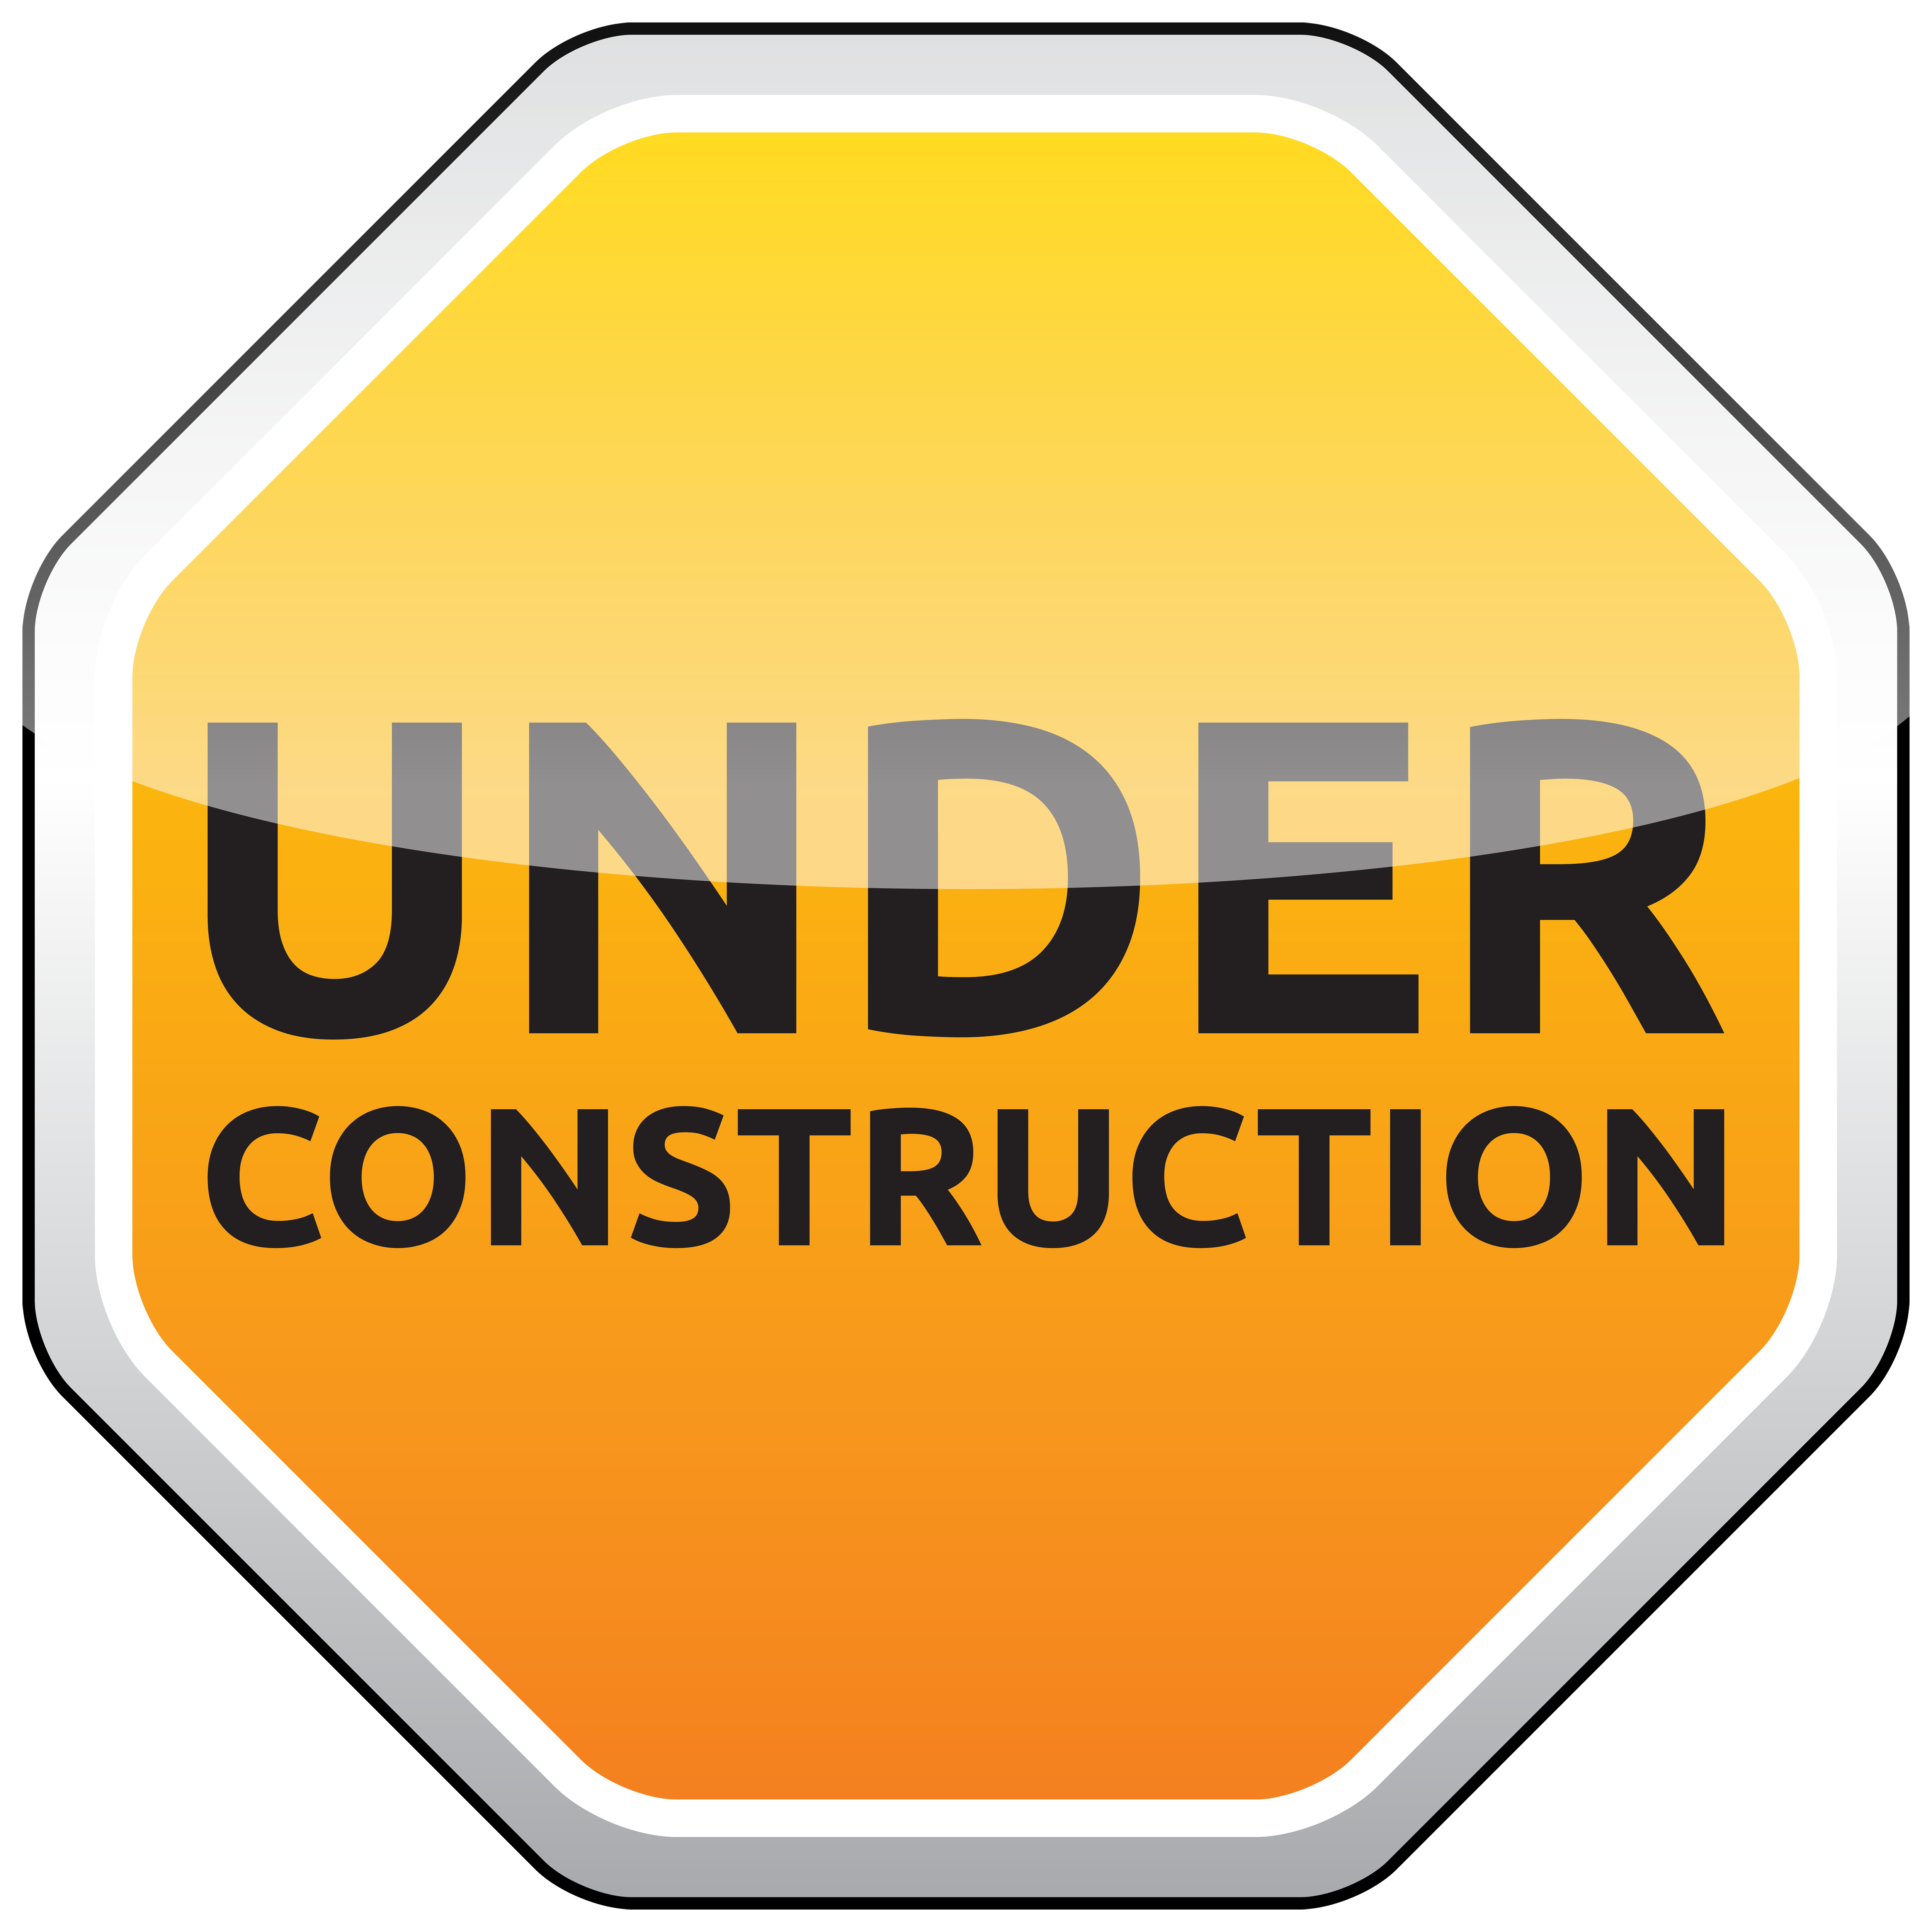 baby under construction clipart - photo #23